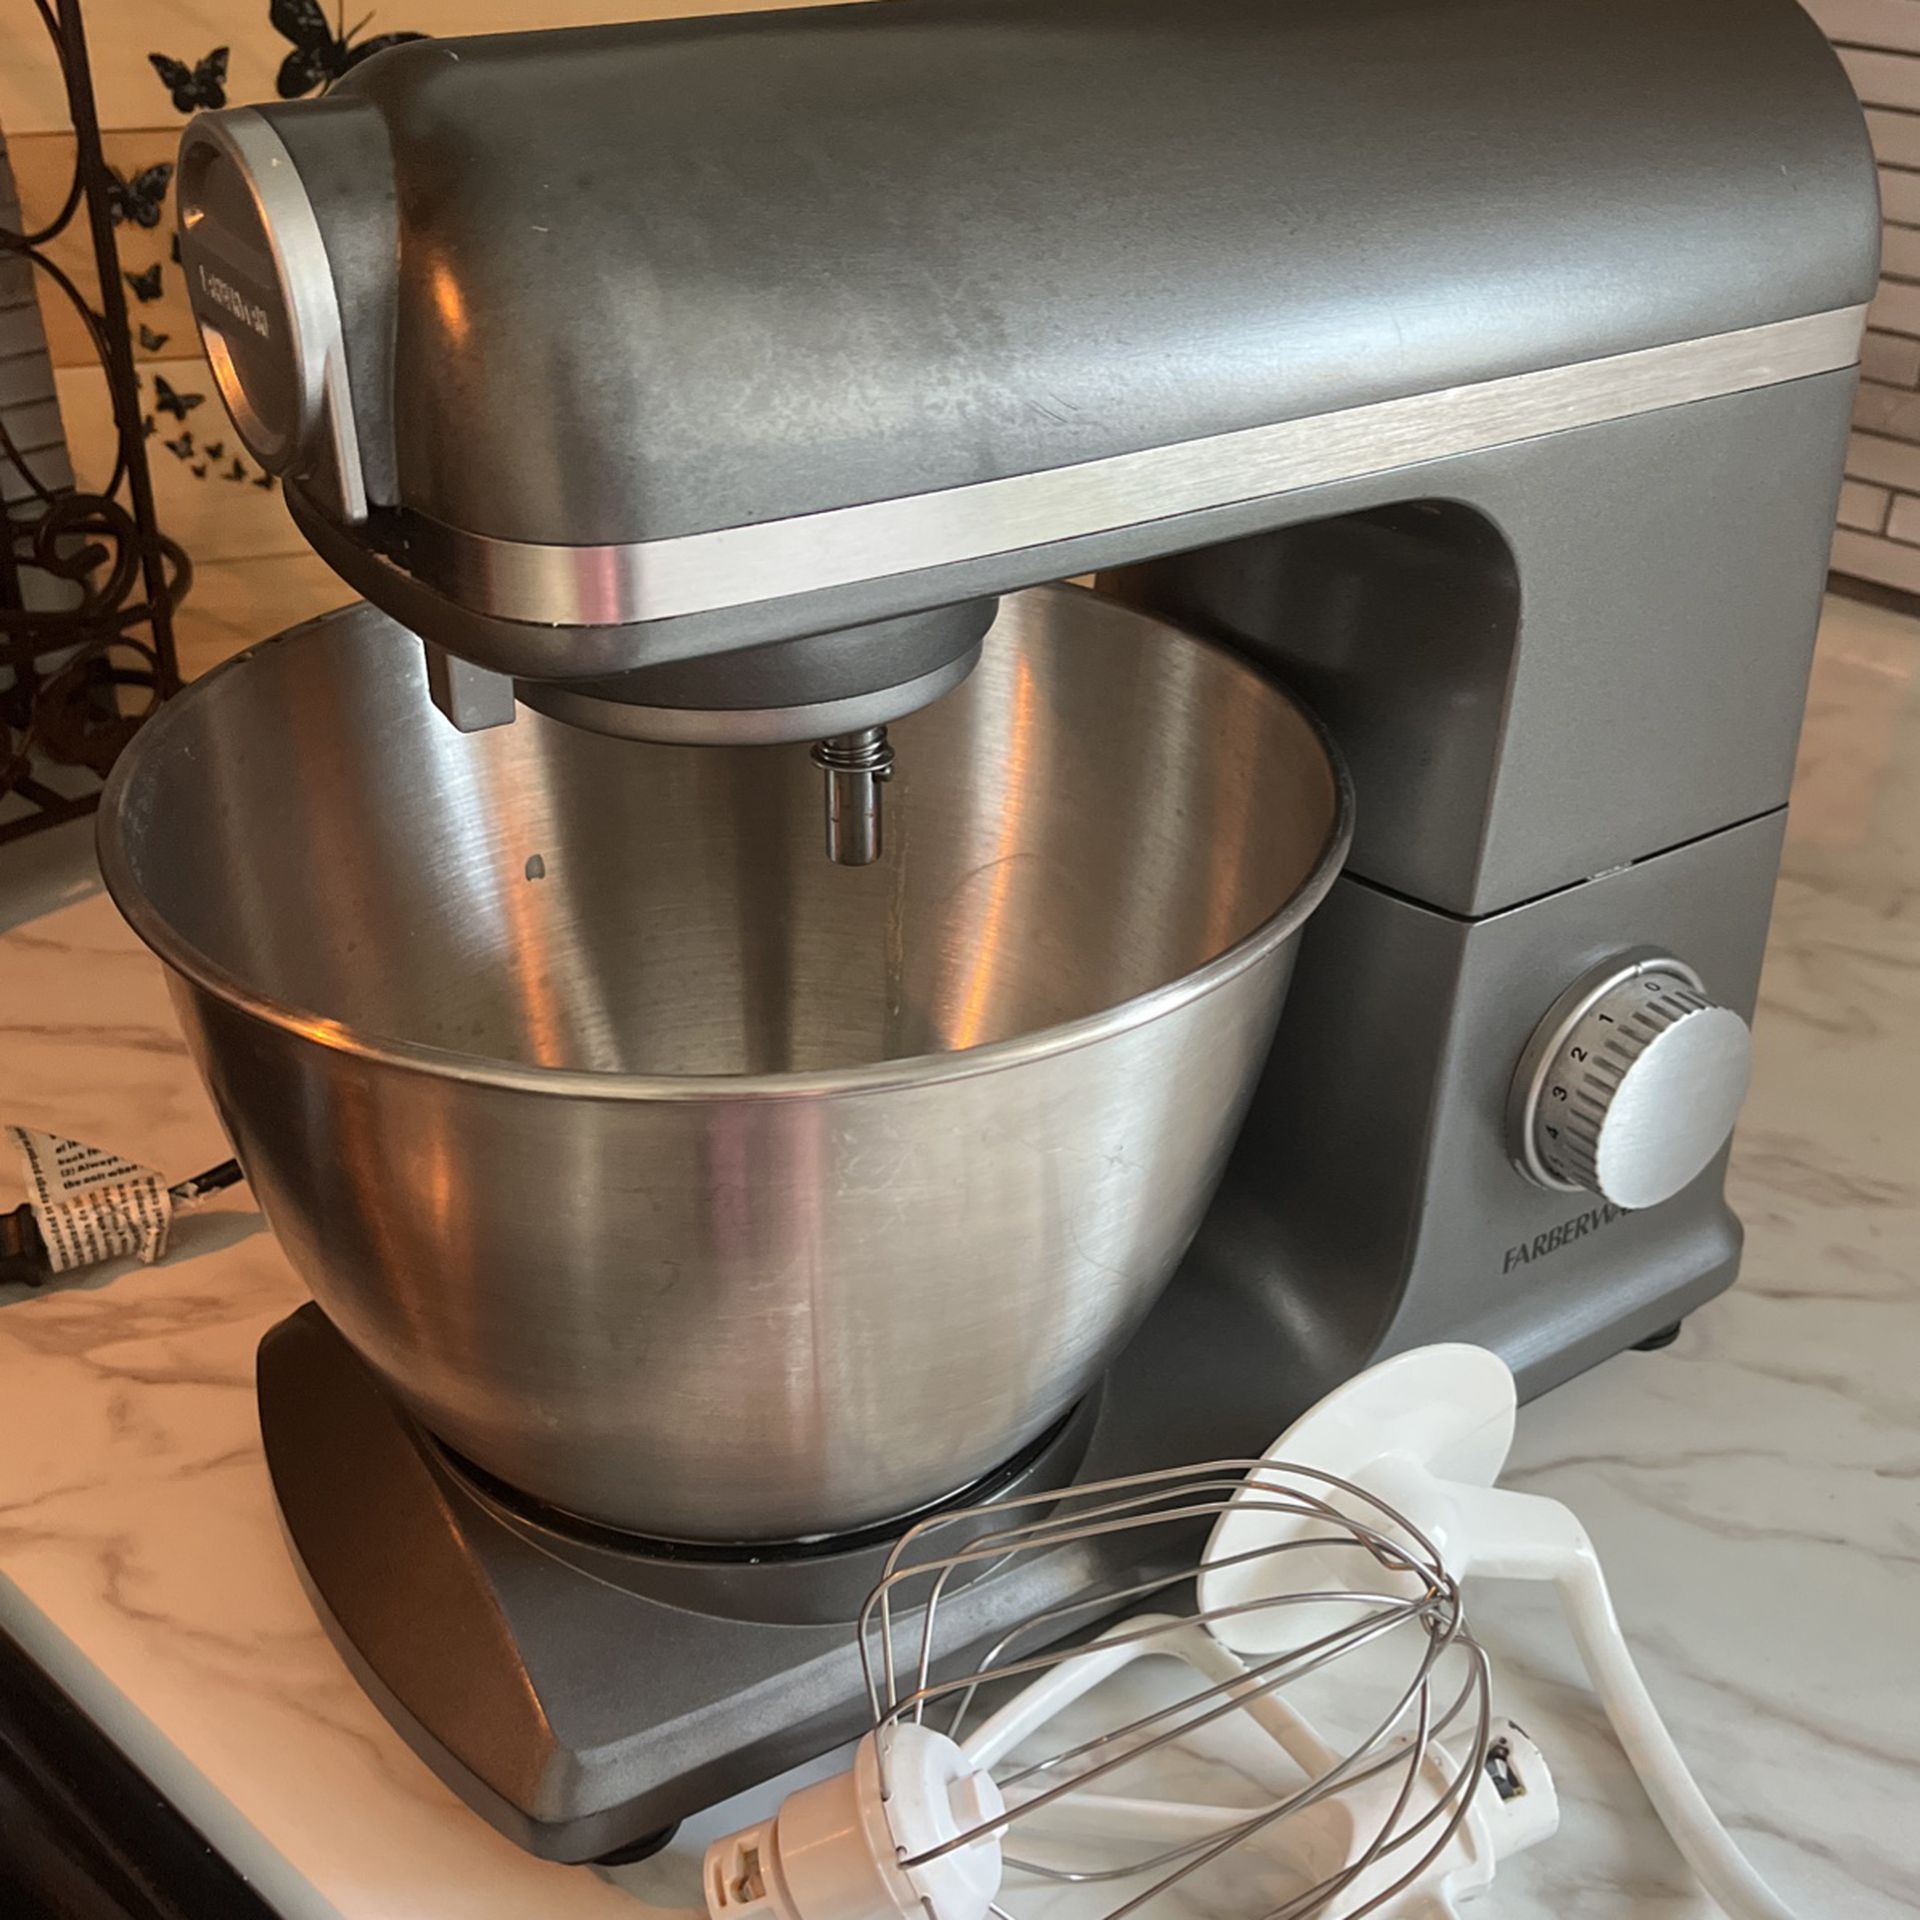 Farberware Stand mixer for Sale in San Diego, CA - OfferUp